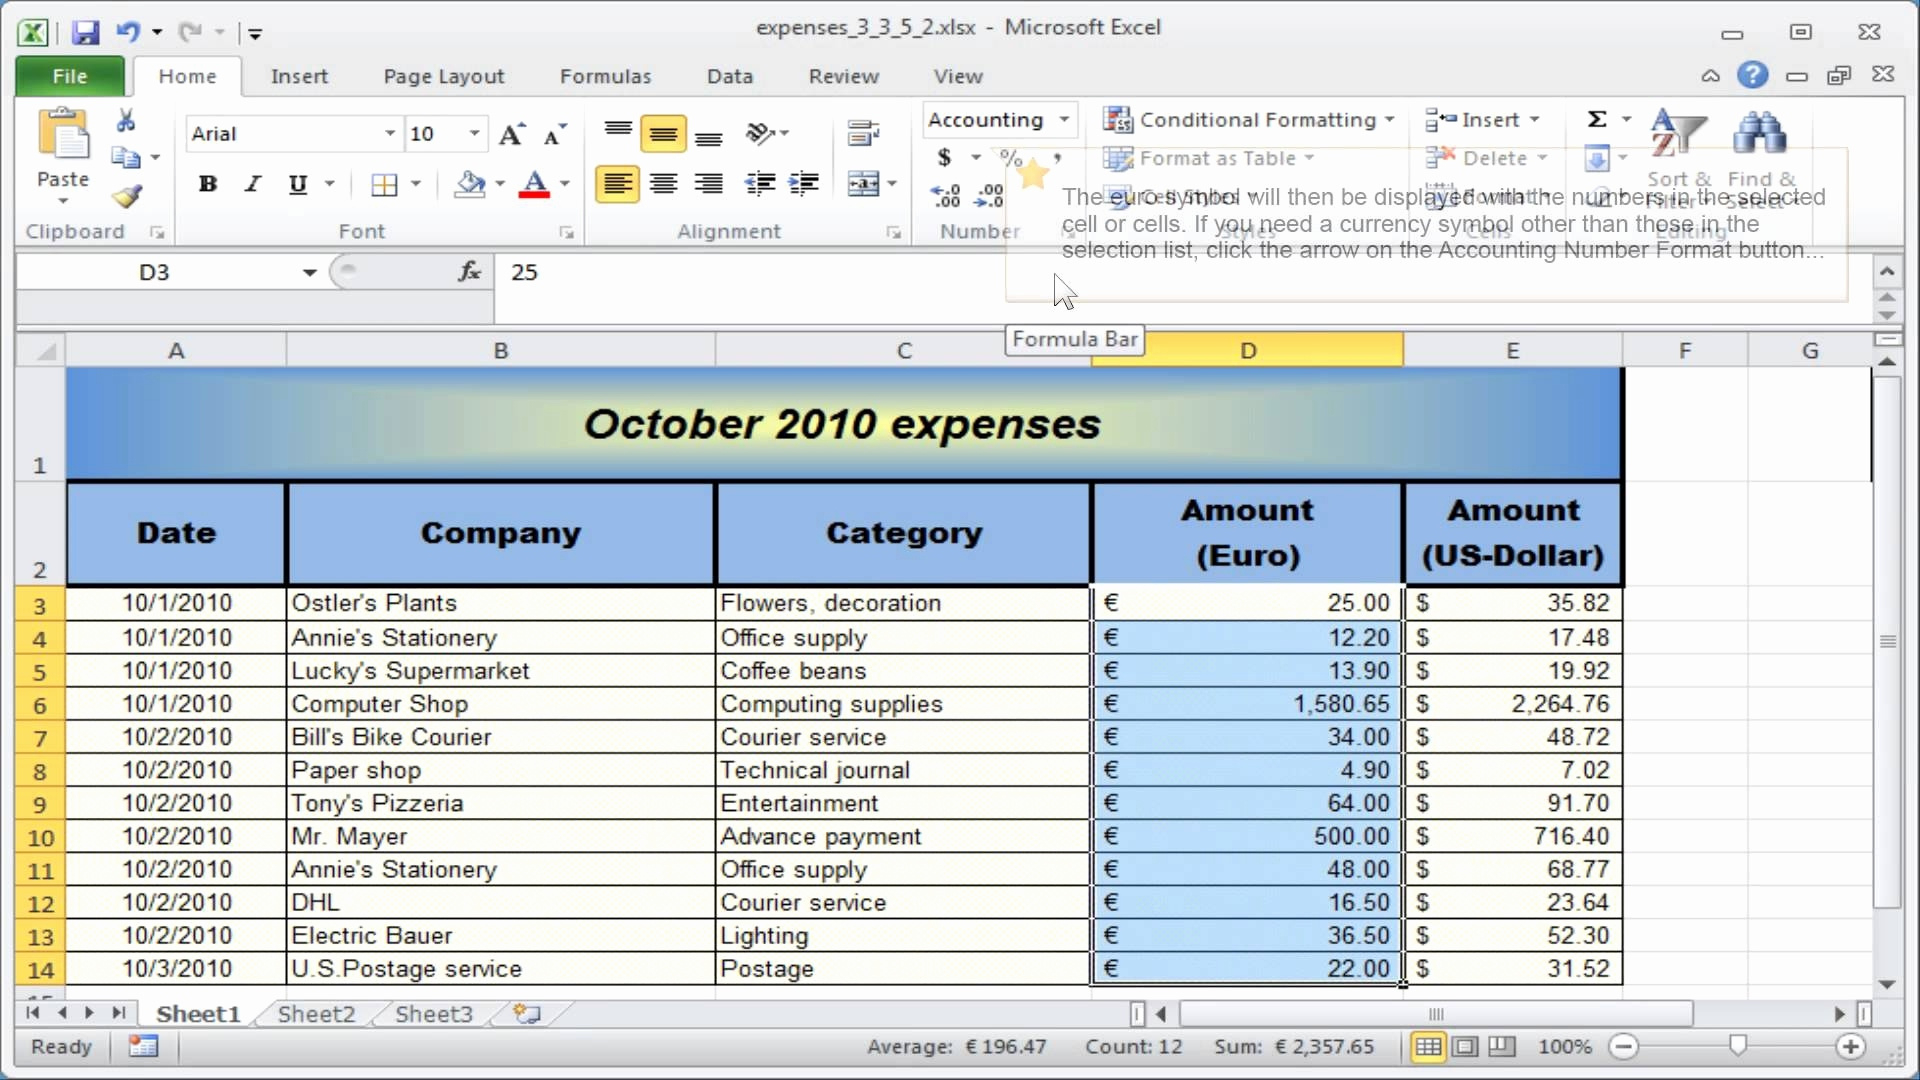 Reserve Study Spreadsheet Pertaining To Free Reserve Study Spreadsheet – Spreadsheet Collections